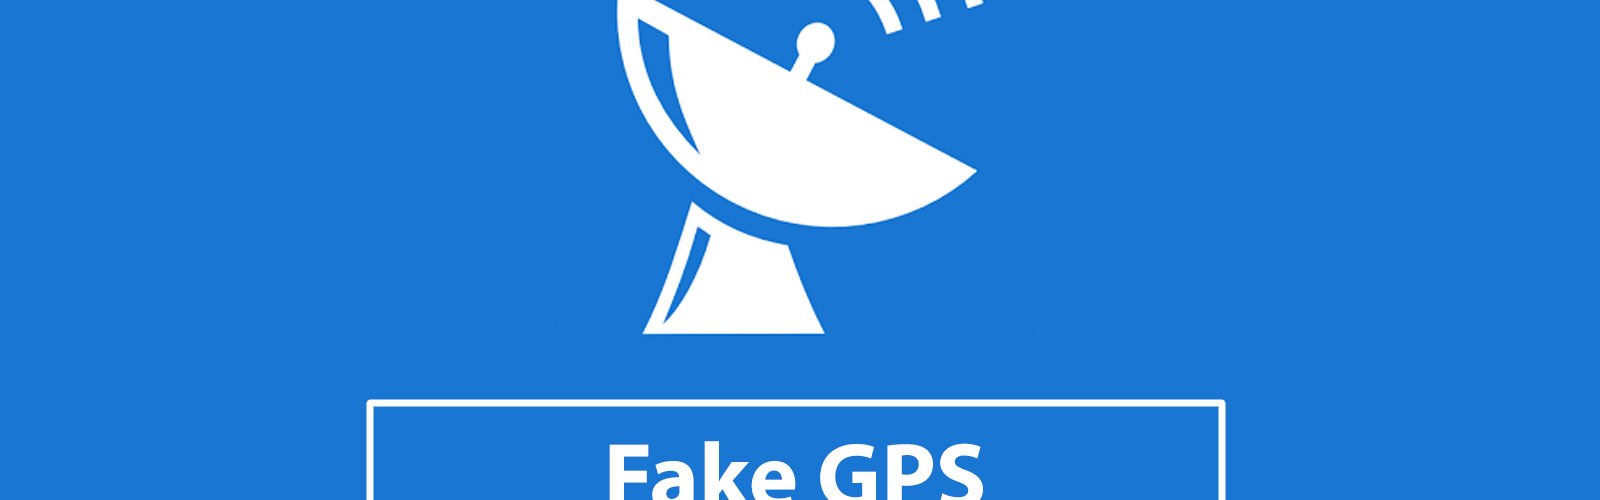 Fake GPS Apps For Android